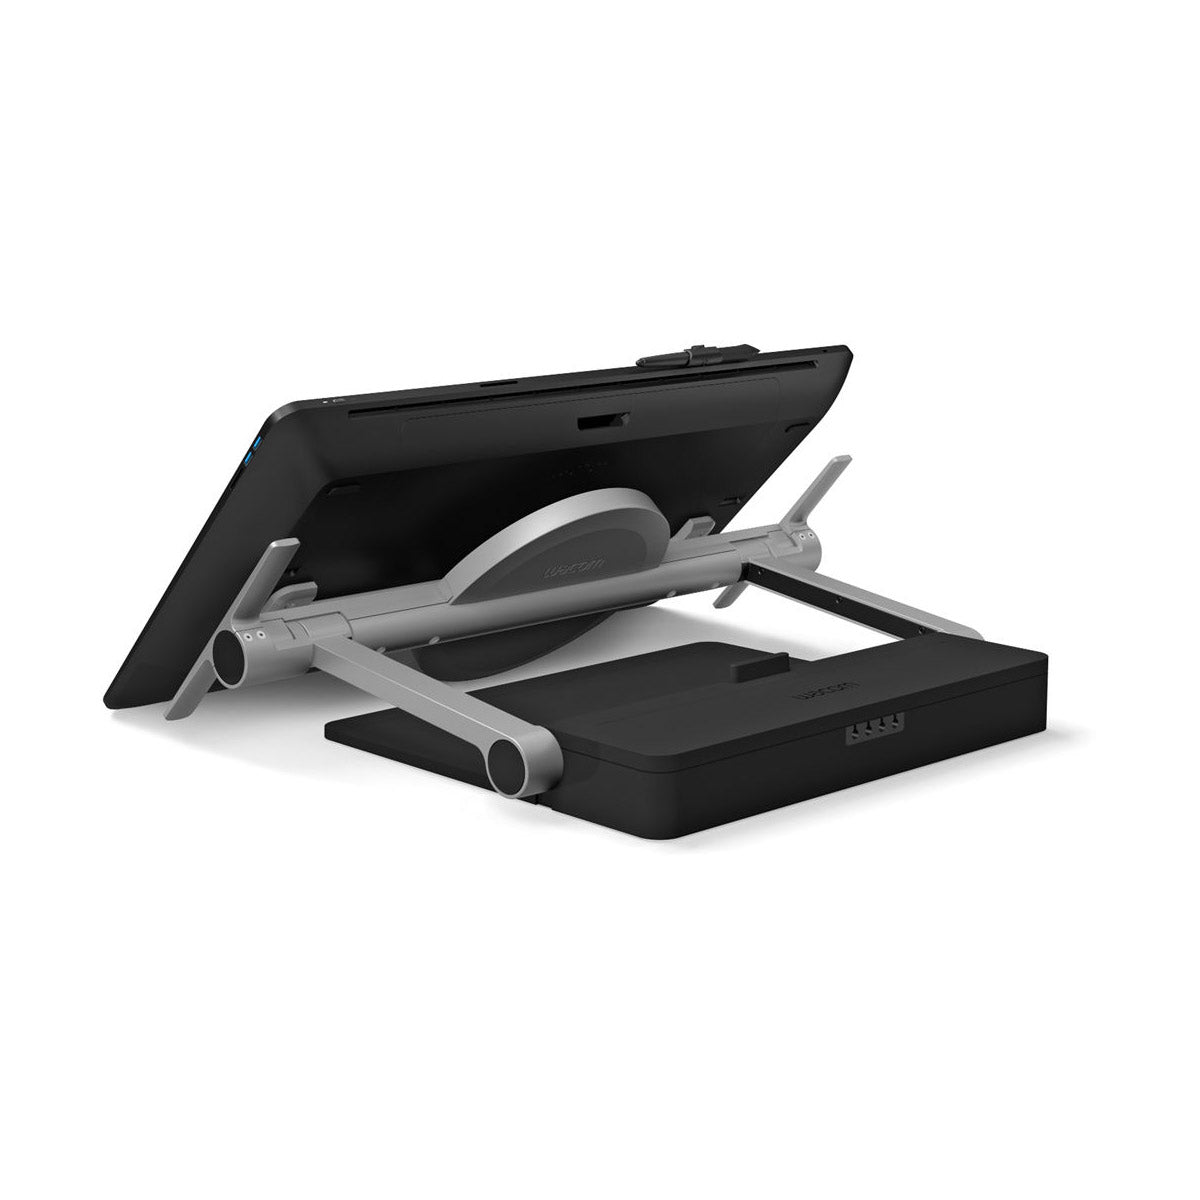 Wacom Cintiq Pro 24 Creative Pen & Touch Display with Stand *OPEN BOX*